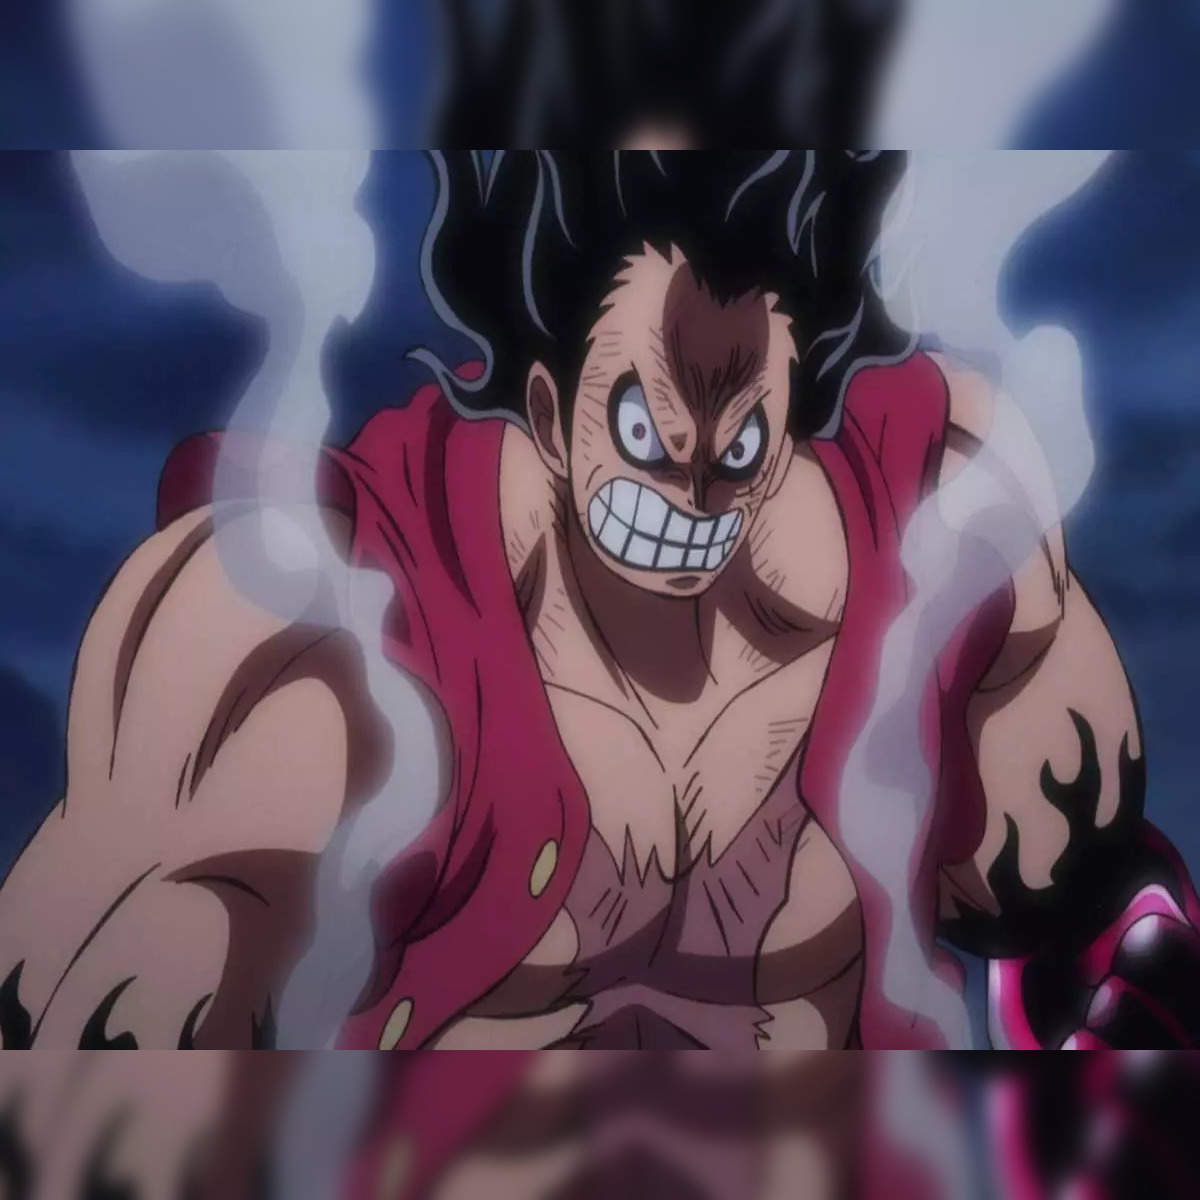 One Piece: One Piece Episode 1071: Check release date, times, where to  watch and all you need to know - The Economic Times